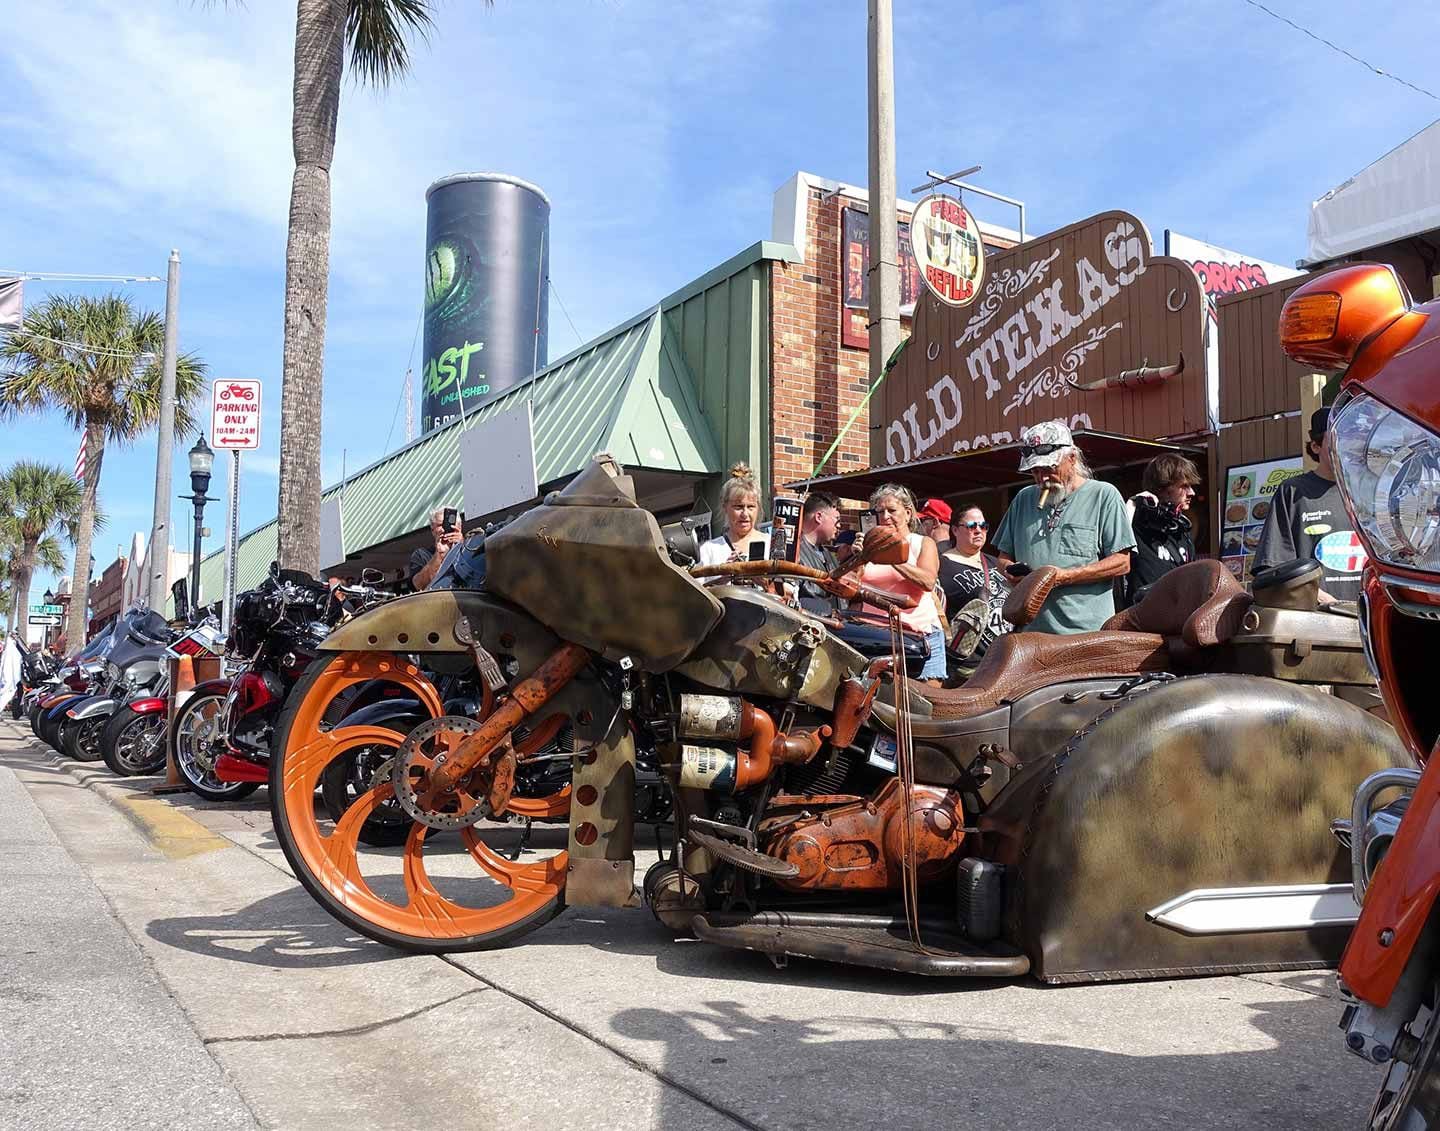 Main Street had no shortage of jaw-dropping customs parked for all to gawk at. The rat-themed “rustic” bagger went all in on the patina.